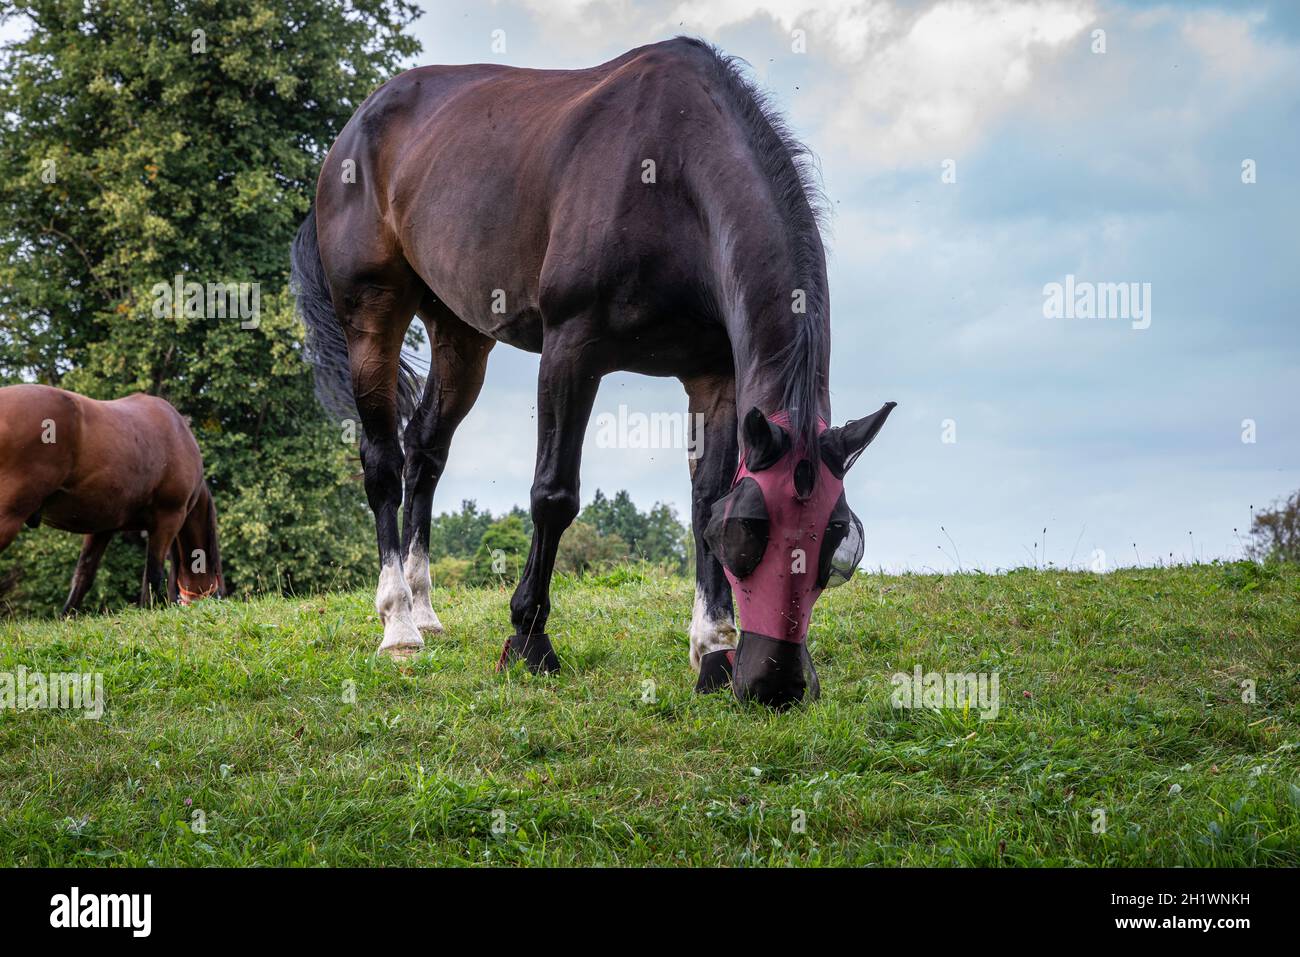 A brown or dark bay horse with white fetlocks wearing a fly mask and grazing in a grass meadow. Stock Photo